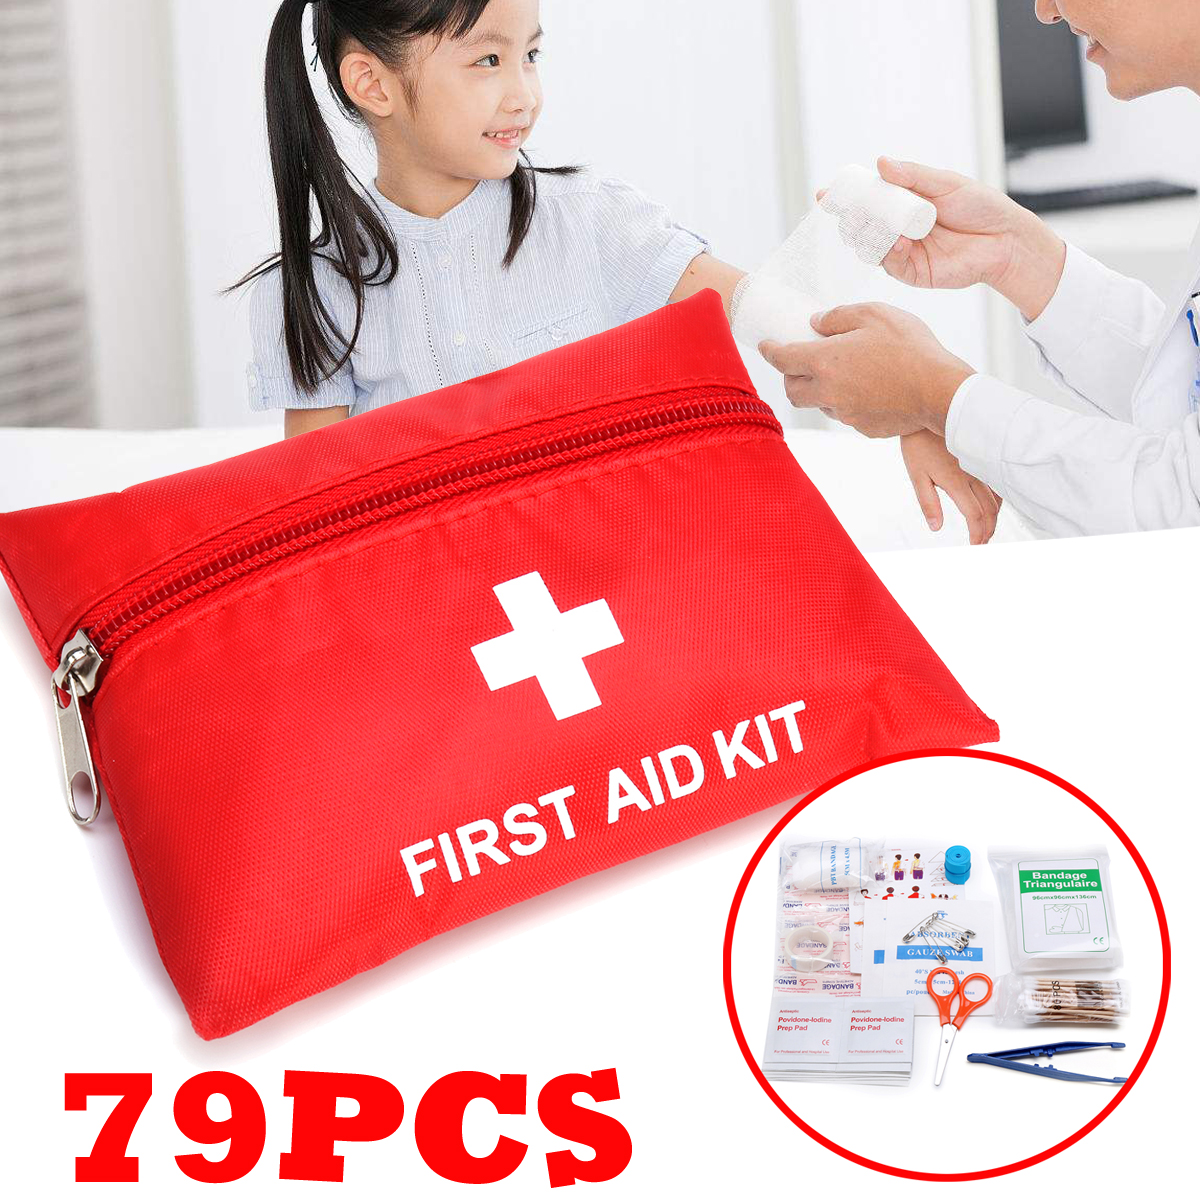 Emergency-First-Aid-Kit-79-Piece-Survival-Supplies-Bag-for-Car-Travel-Home-Emergency-Box-1420491-2